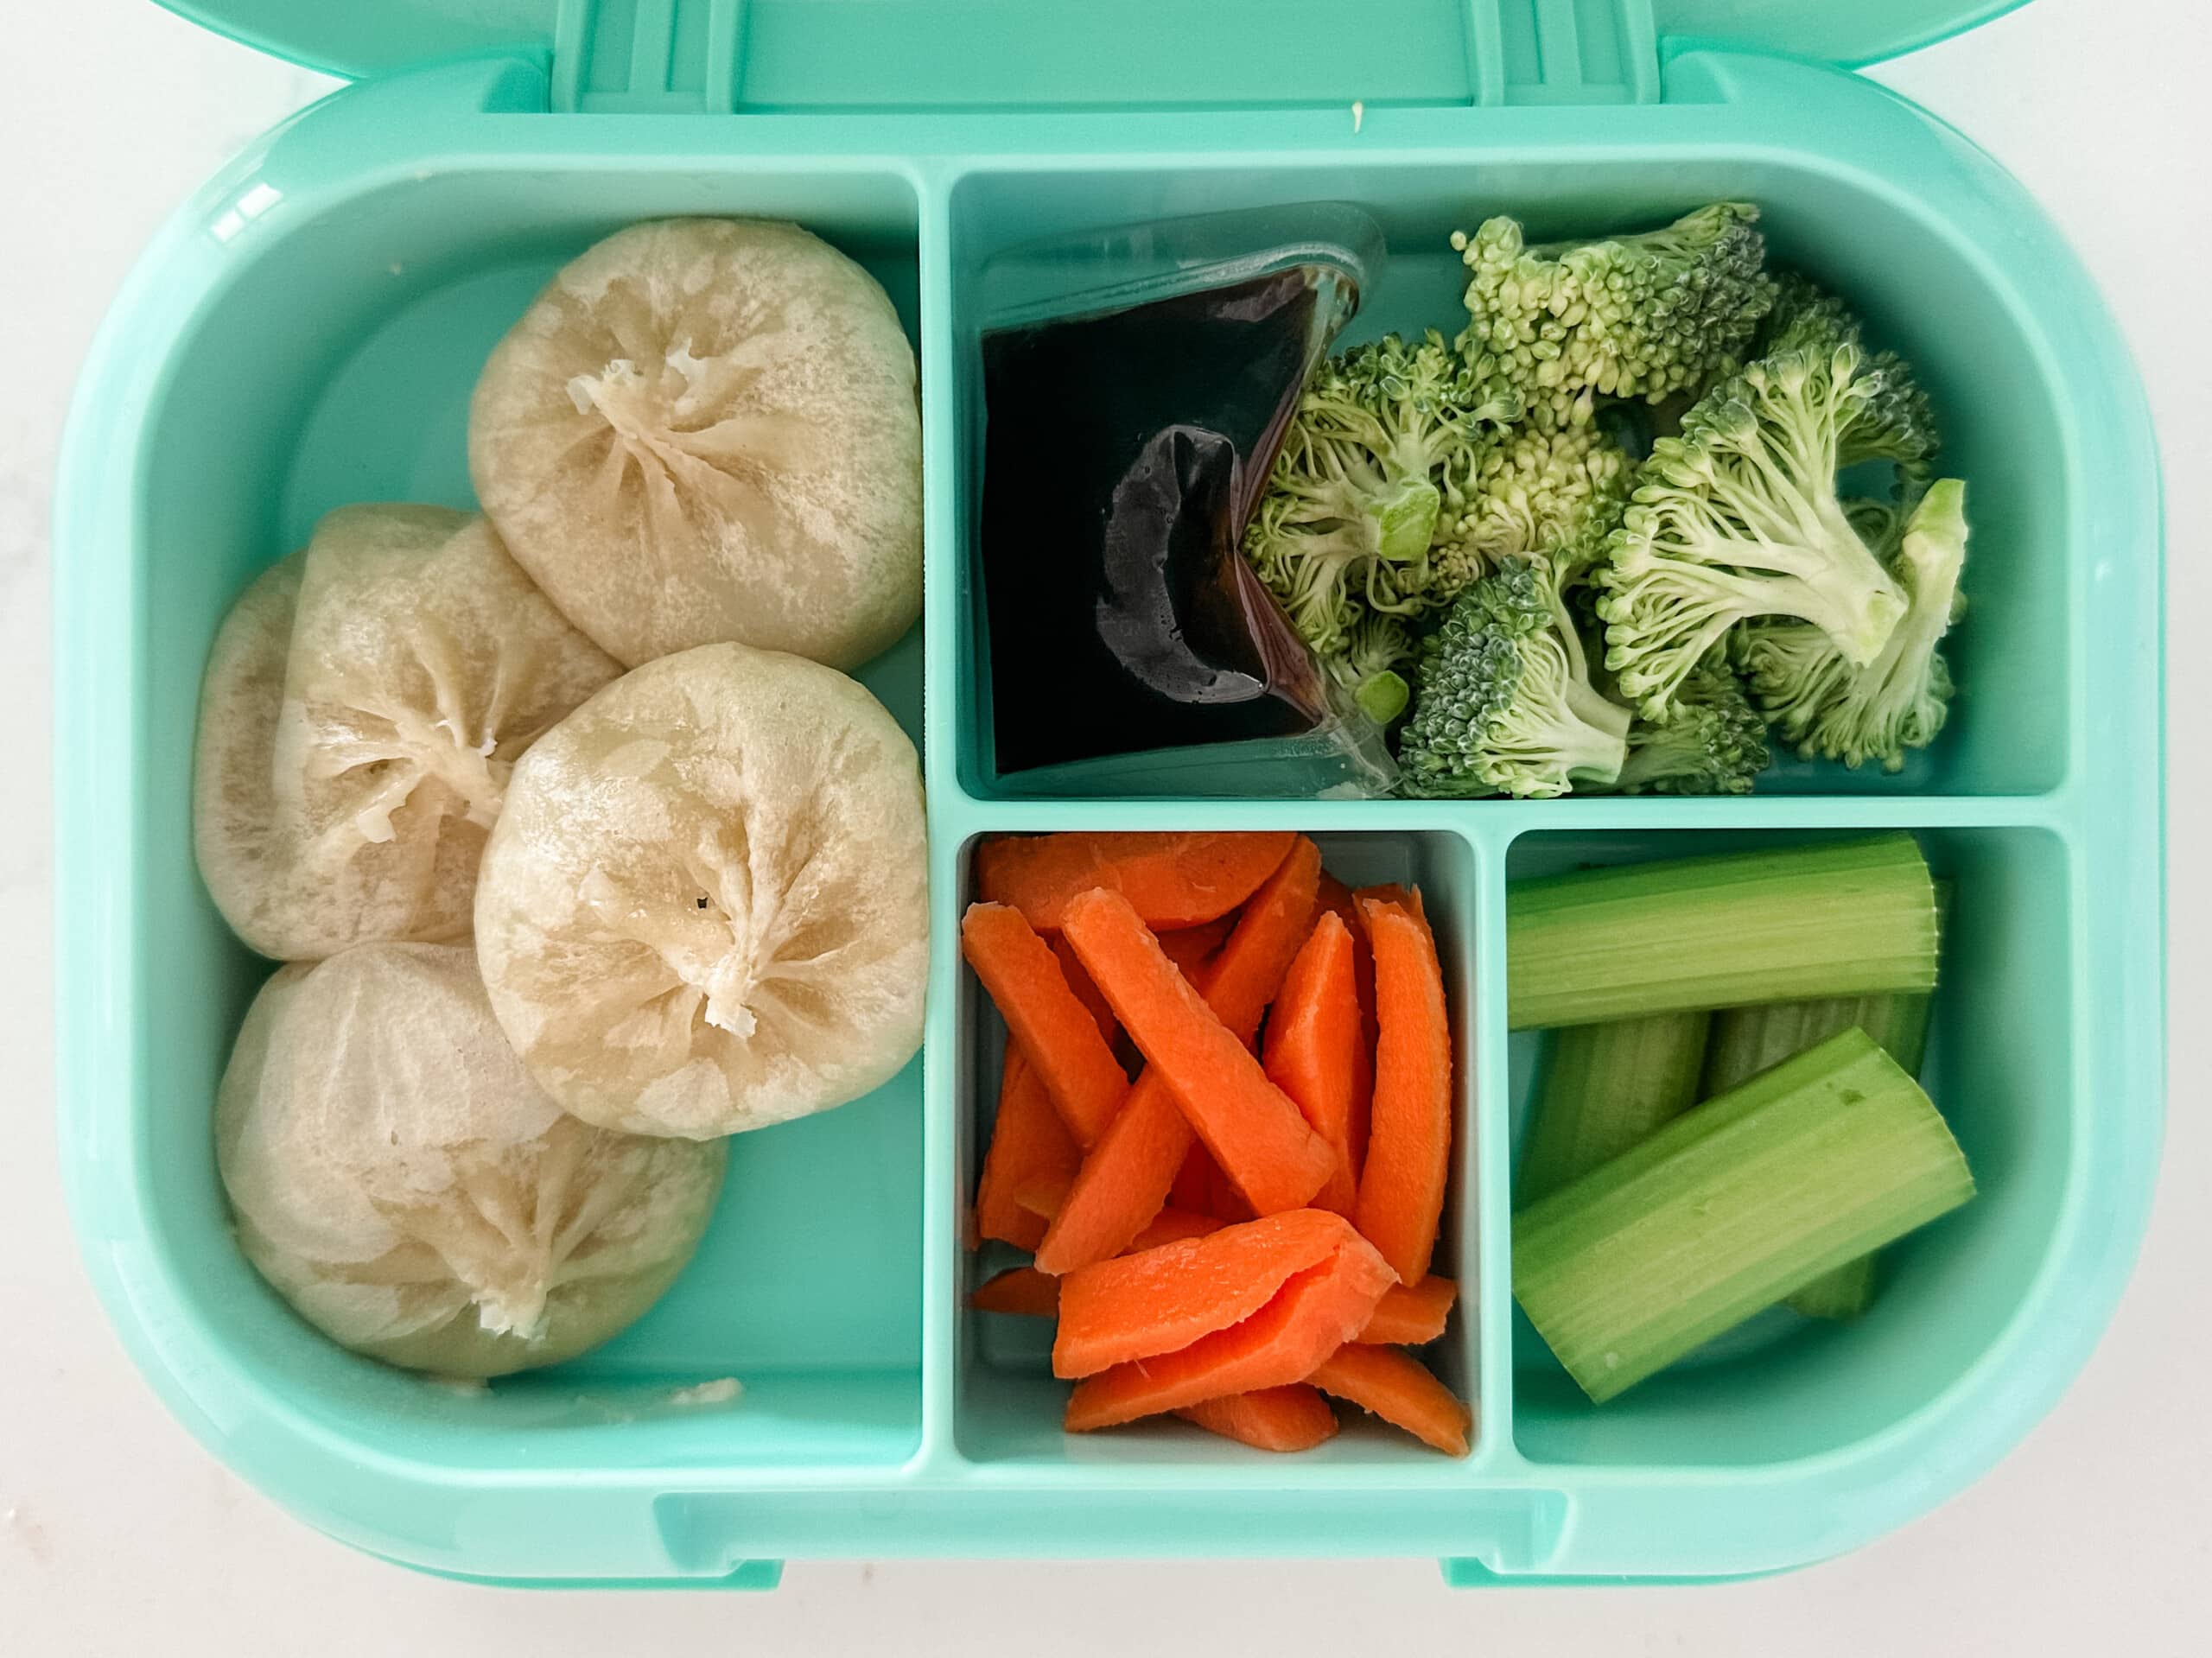 Mint green bento box for kids filled with dumplings, carrots, celery, broccoli, and soy sauce packet